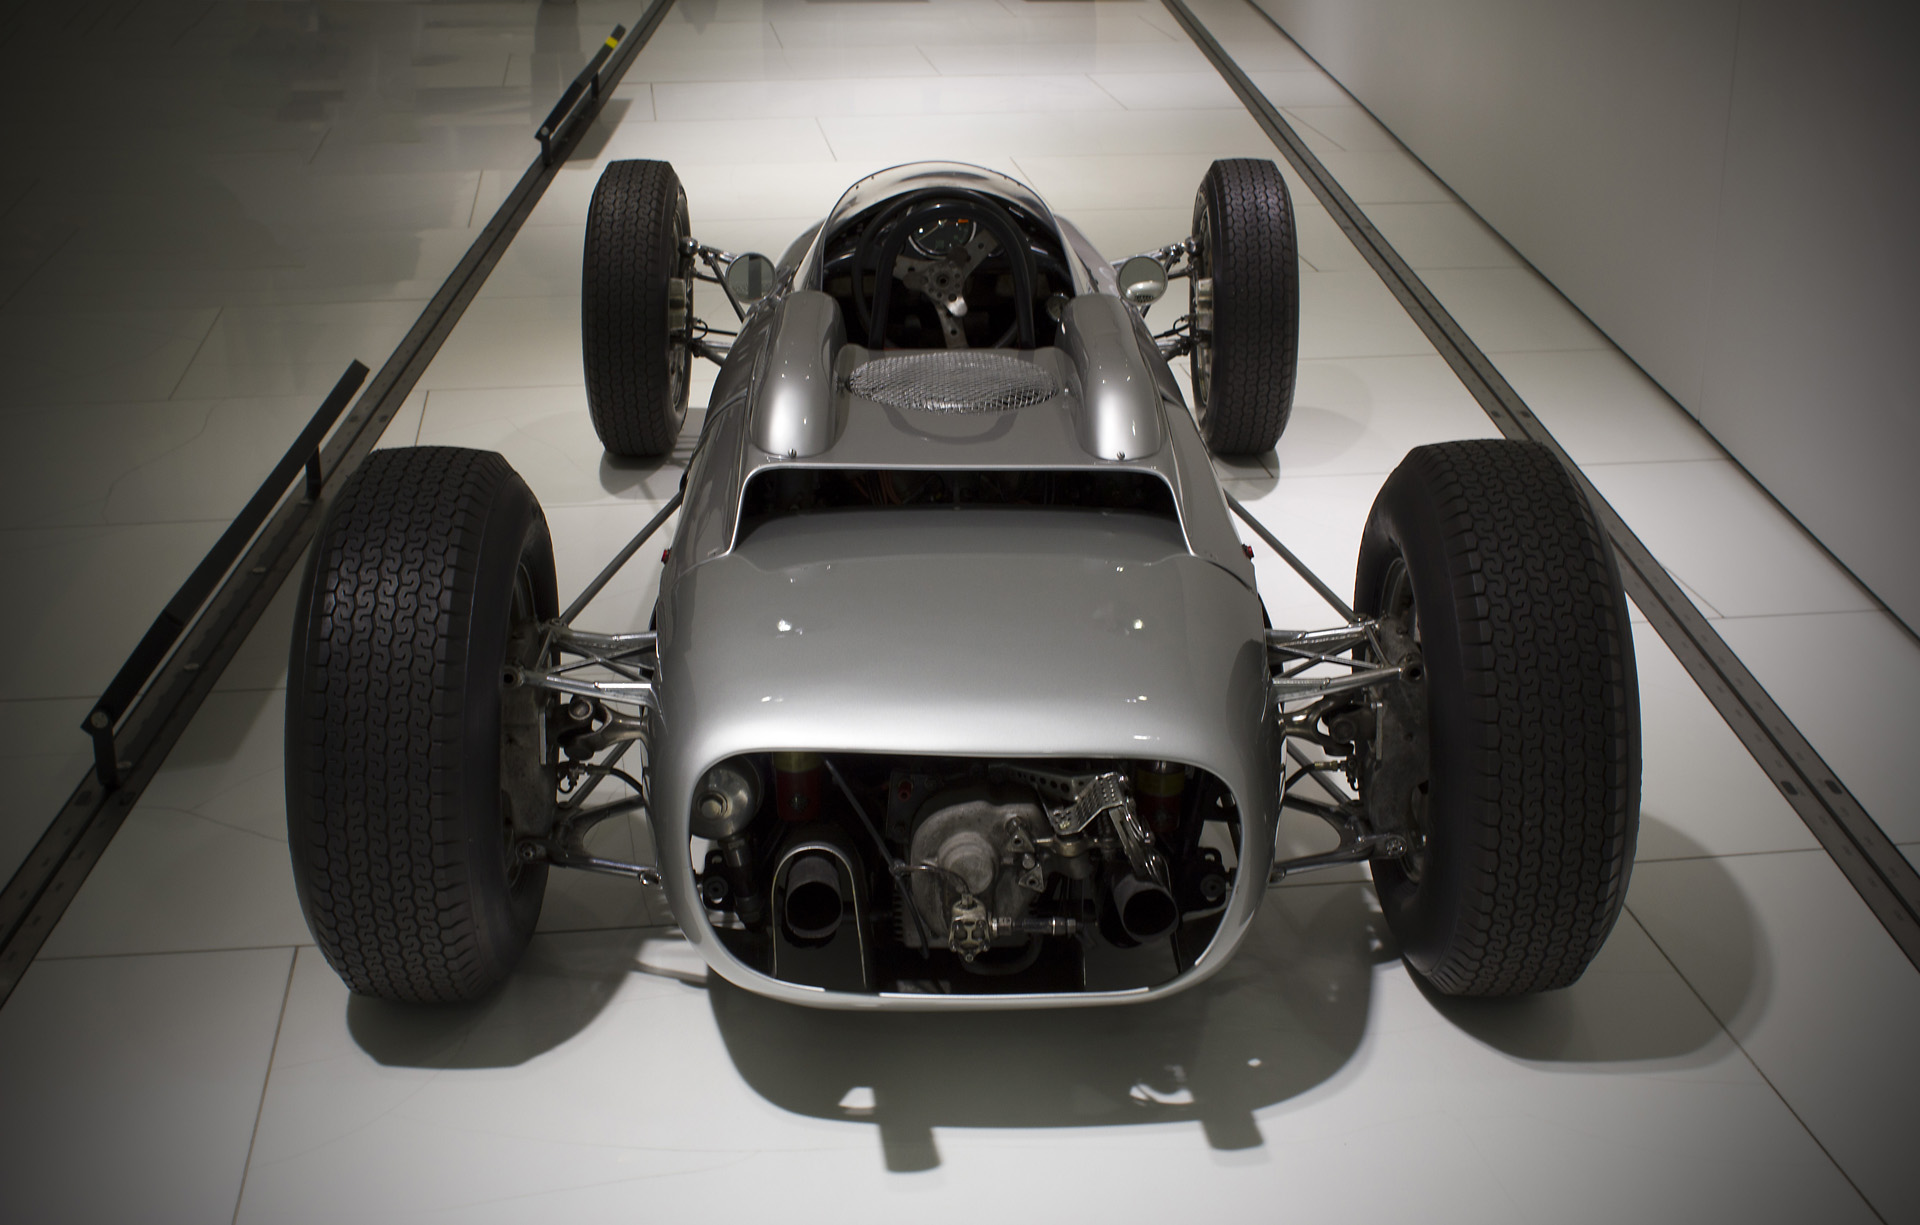 an old model of a race car is seen in this image